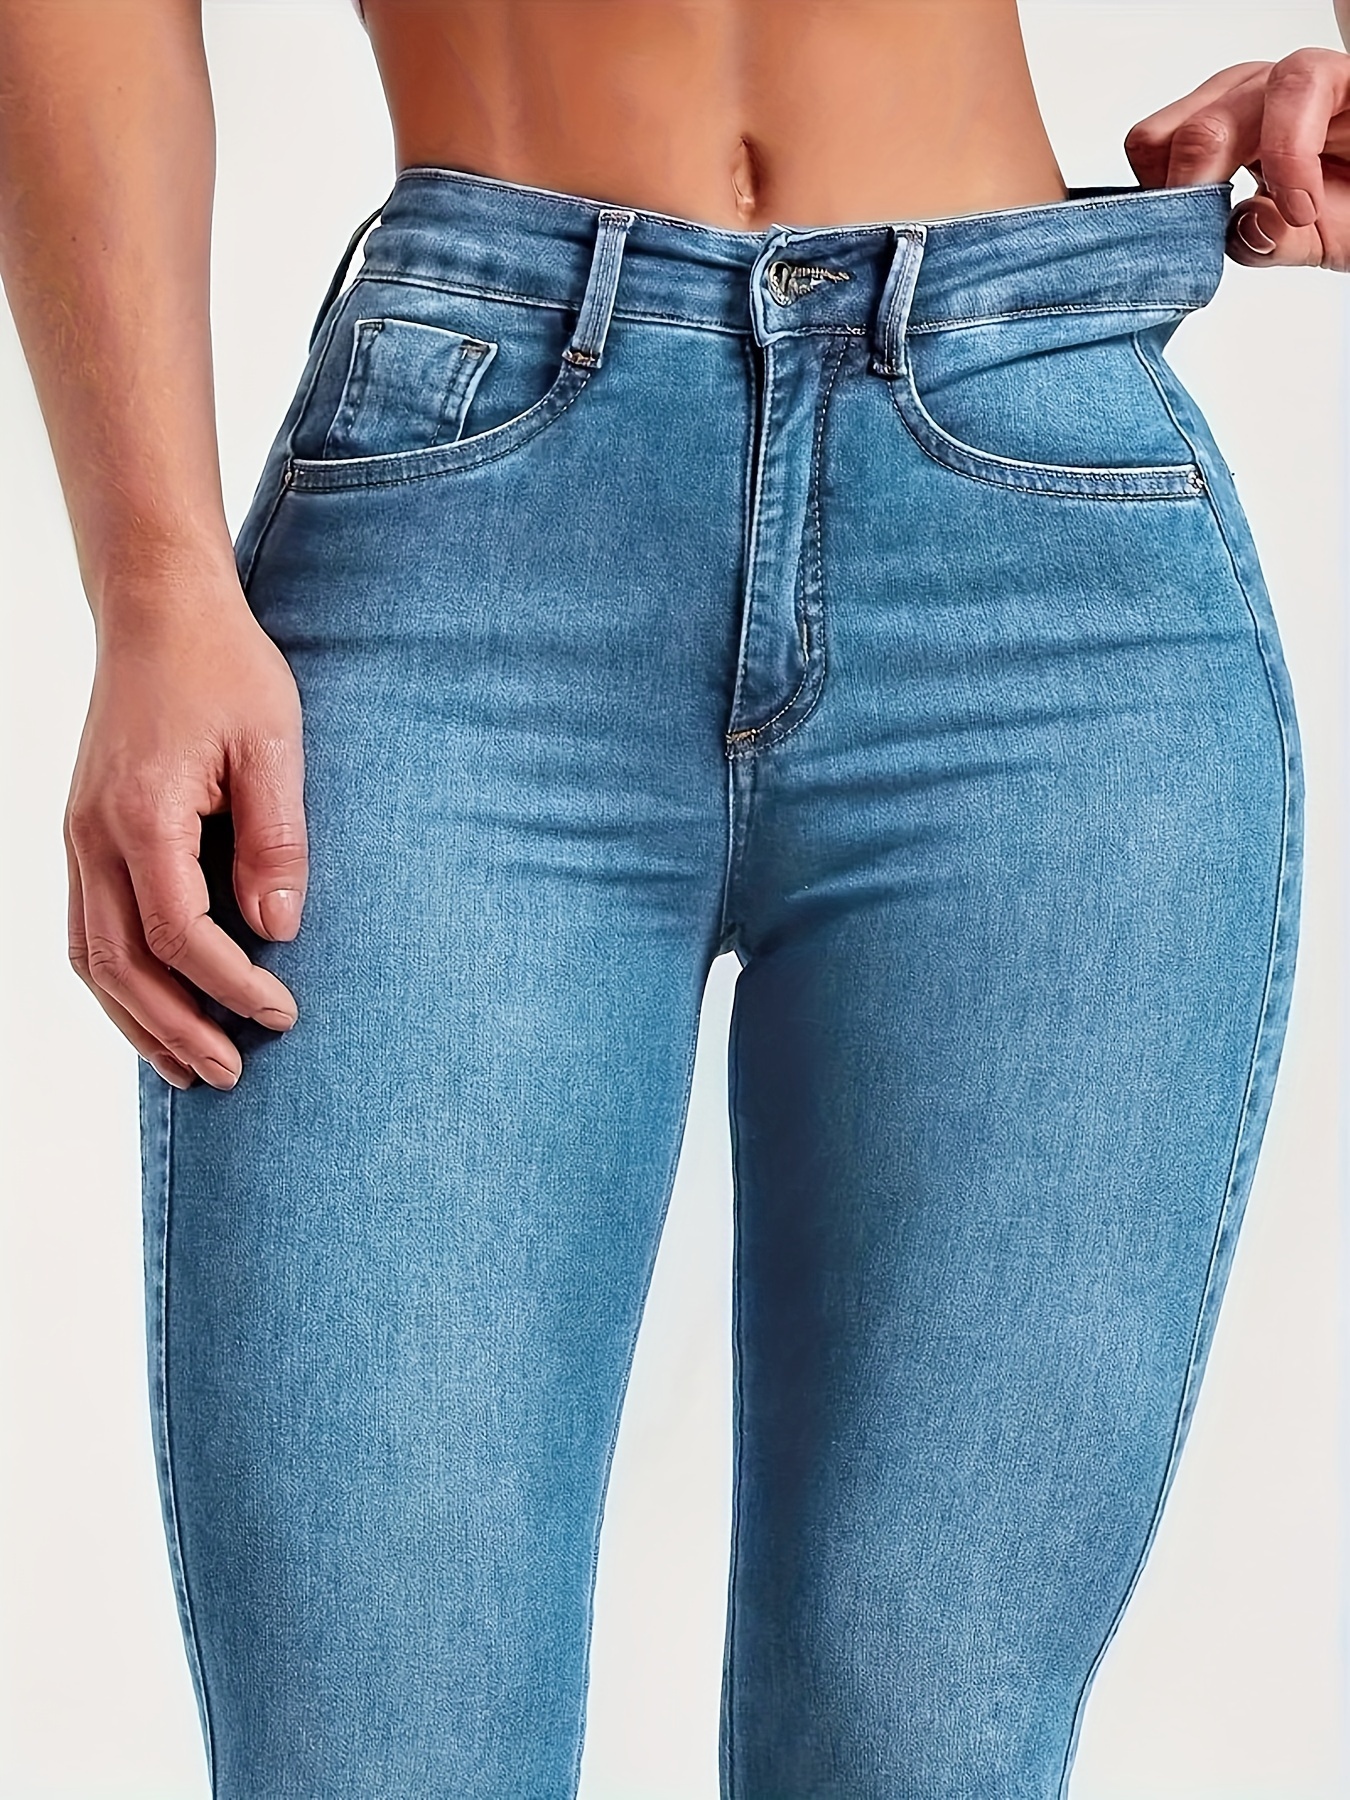 Skinny Jeans for Women Stretchy High Waist Butt Lifting Curvy Tight Classic  Slim Pull On Denim Pants Juniors Jeans at  Women's Jeans store